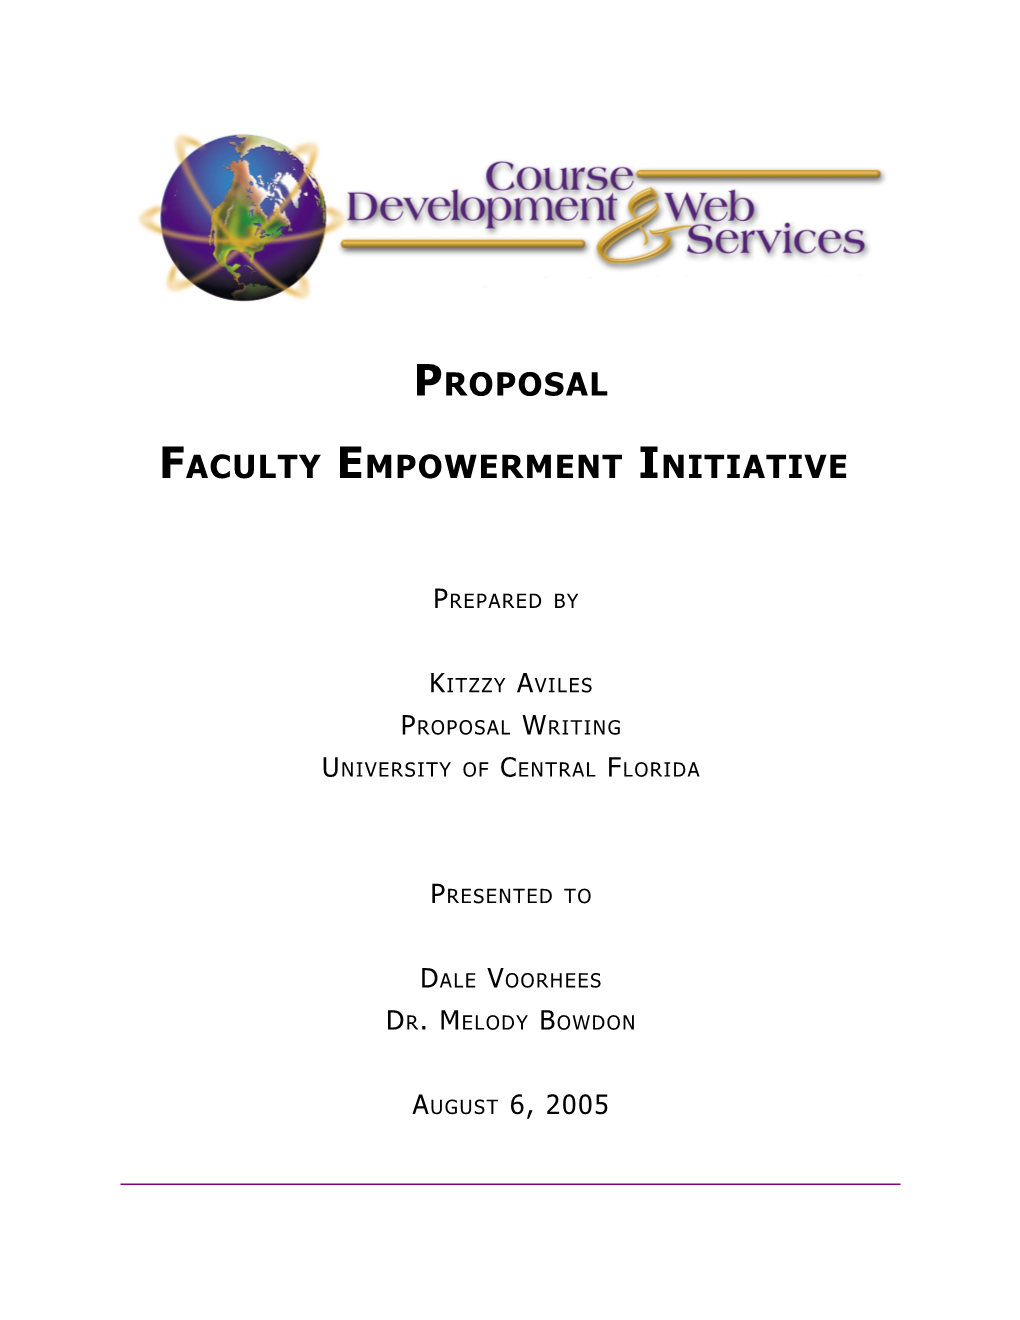 Faculty Empowerment Initiative Proposal